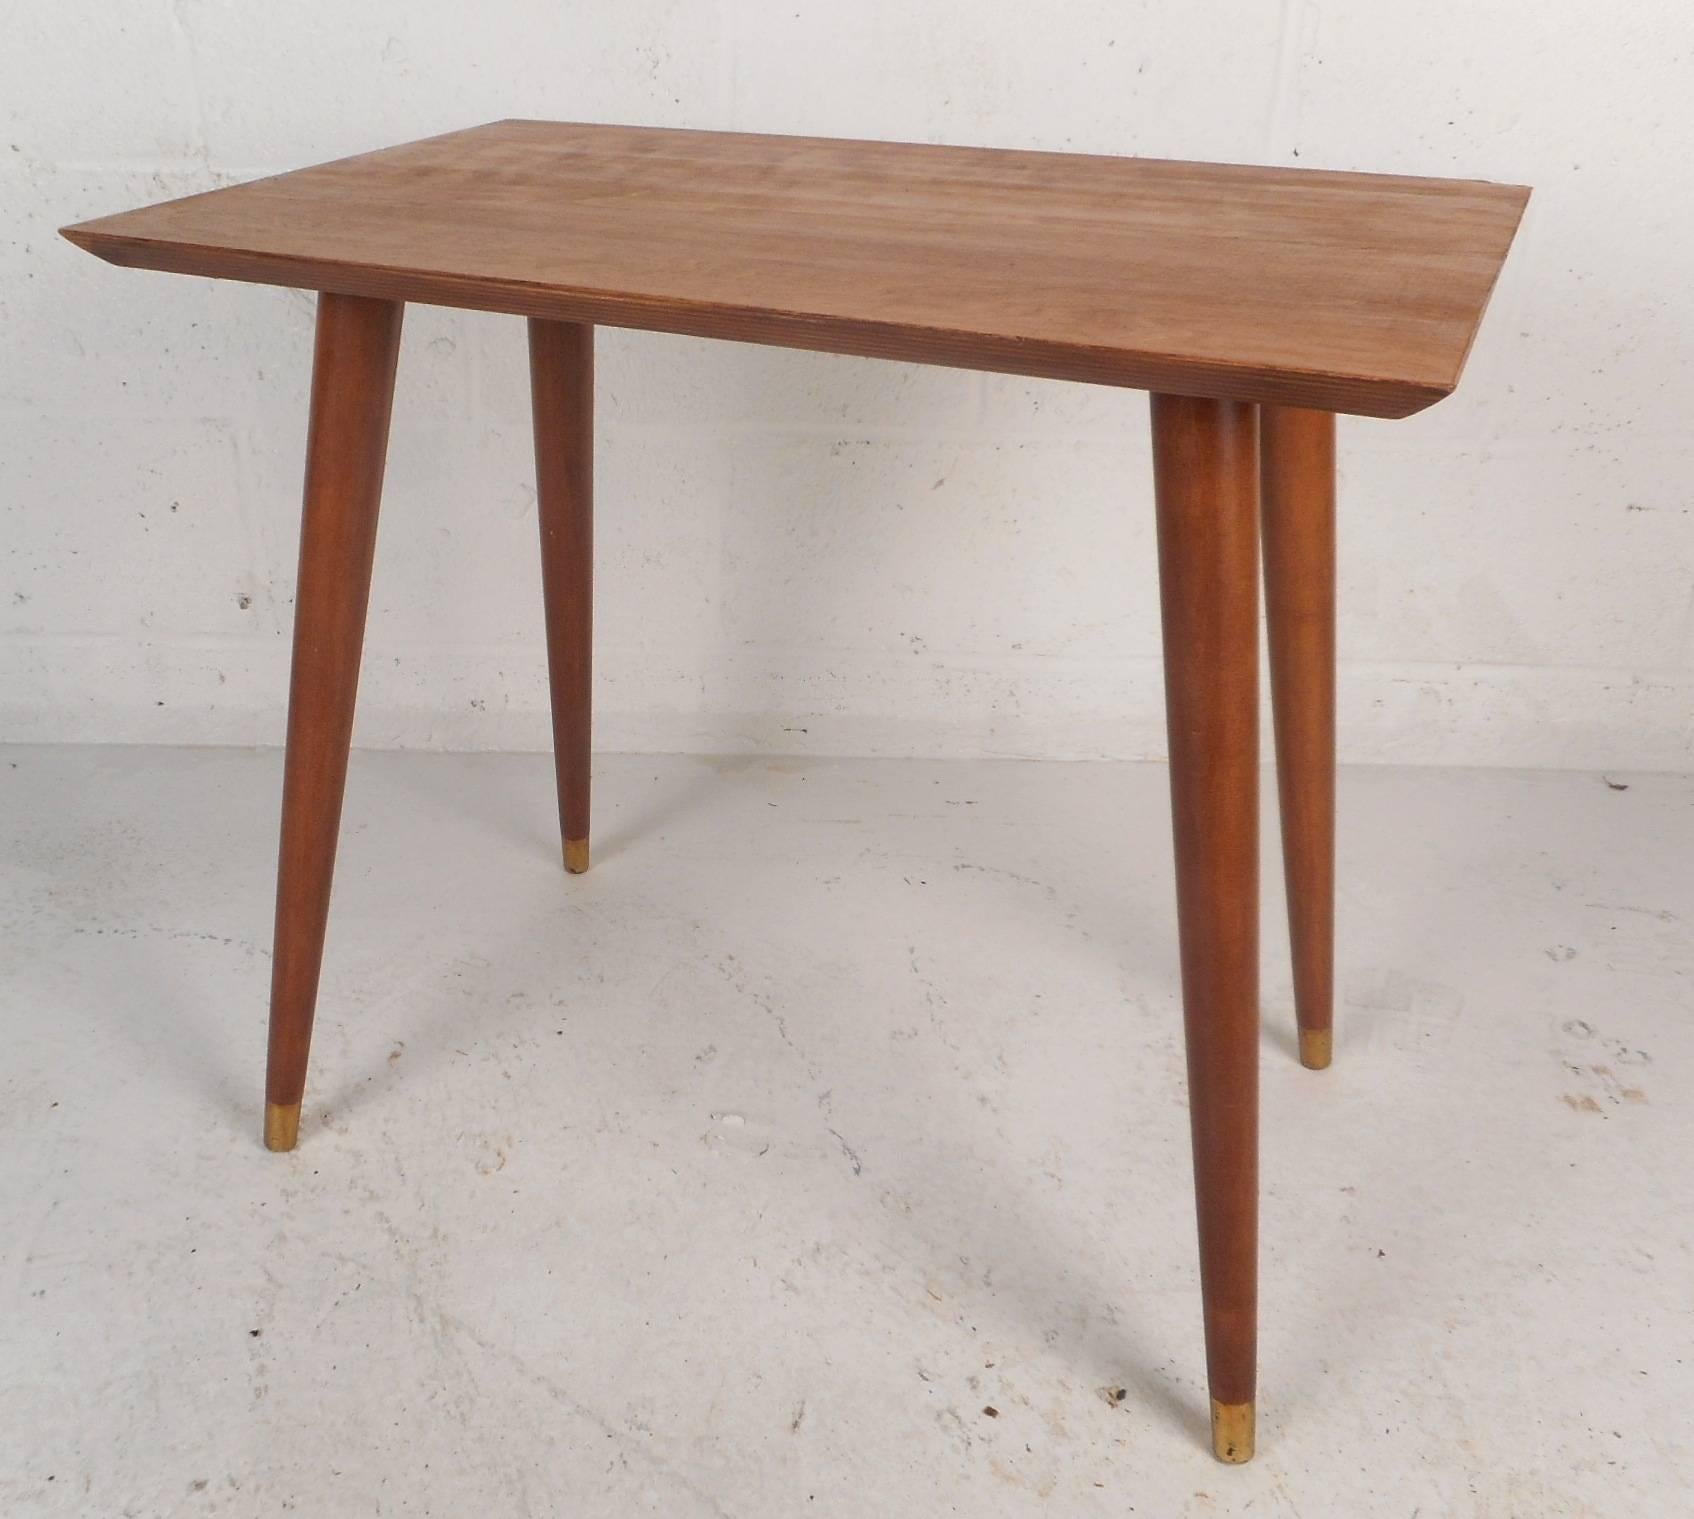 This beautiful vintage modern side table features long tapered and splayed legs with brass capped feet. Sleek design has a rectangular top with bevelled edges and gorgeous maple wood grain. This unique mid-century end table makes the perfect